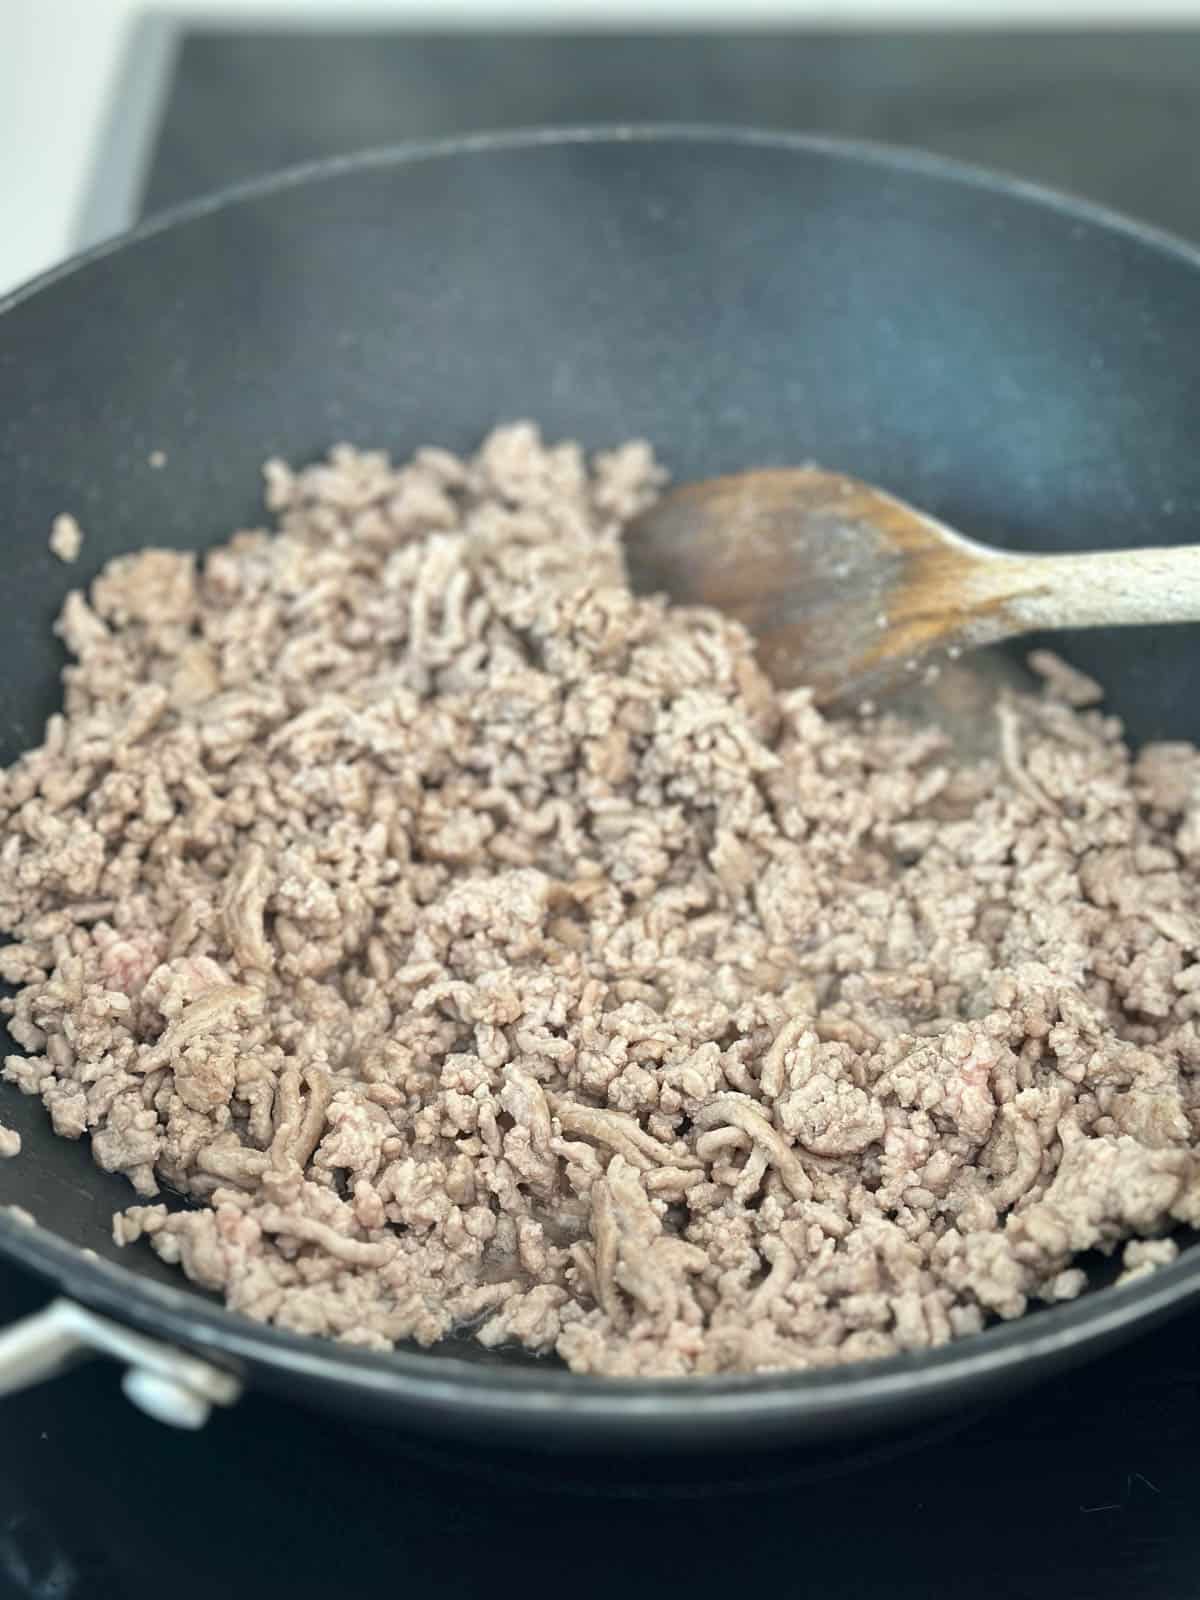 Pork mince browning in wok.